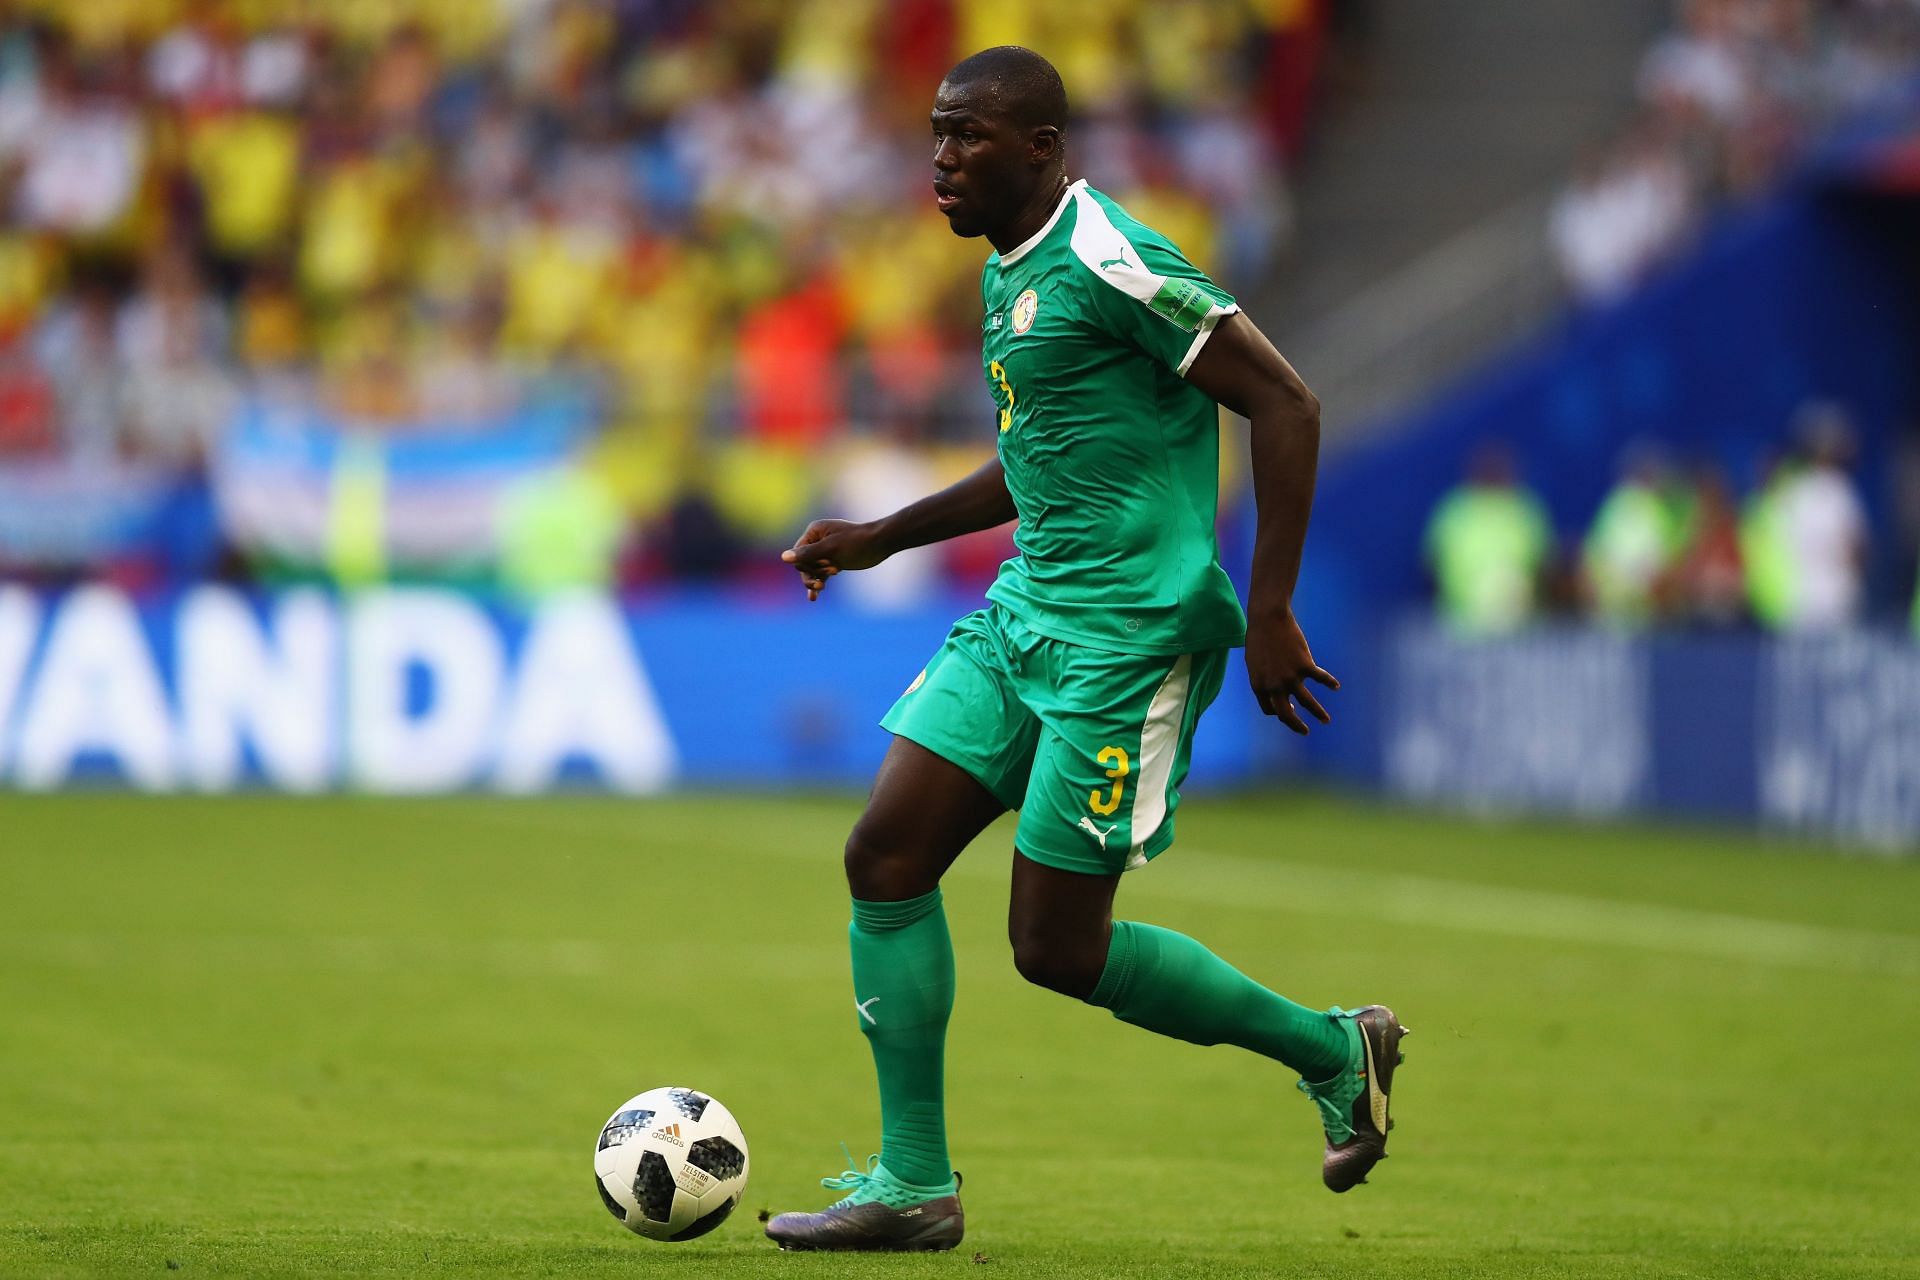 Kalidou Koulibaly will be looking to lead Senegal to its first AFCON title